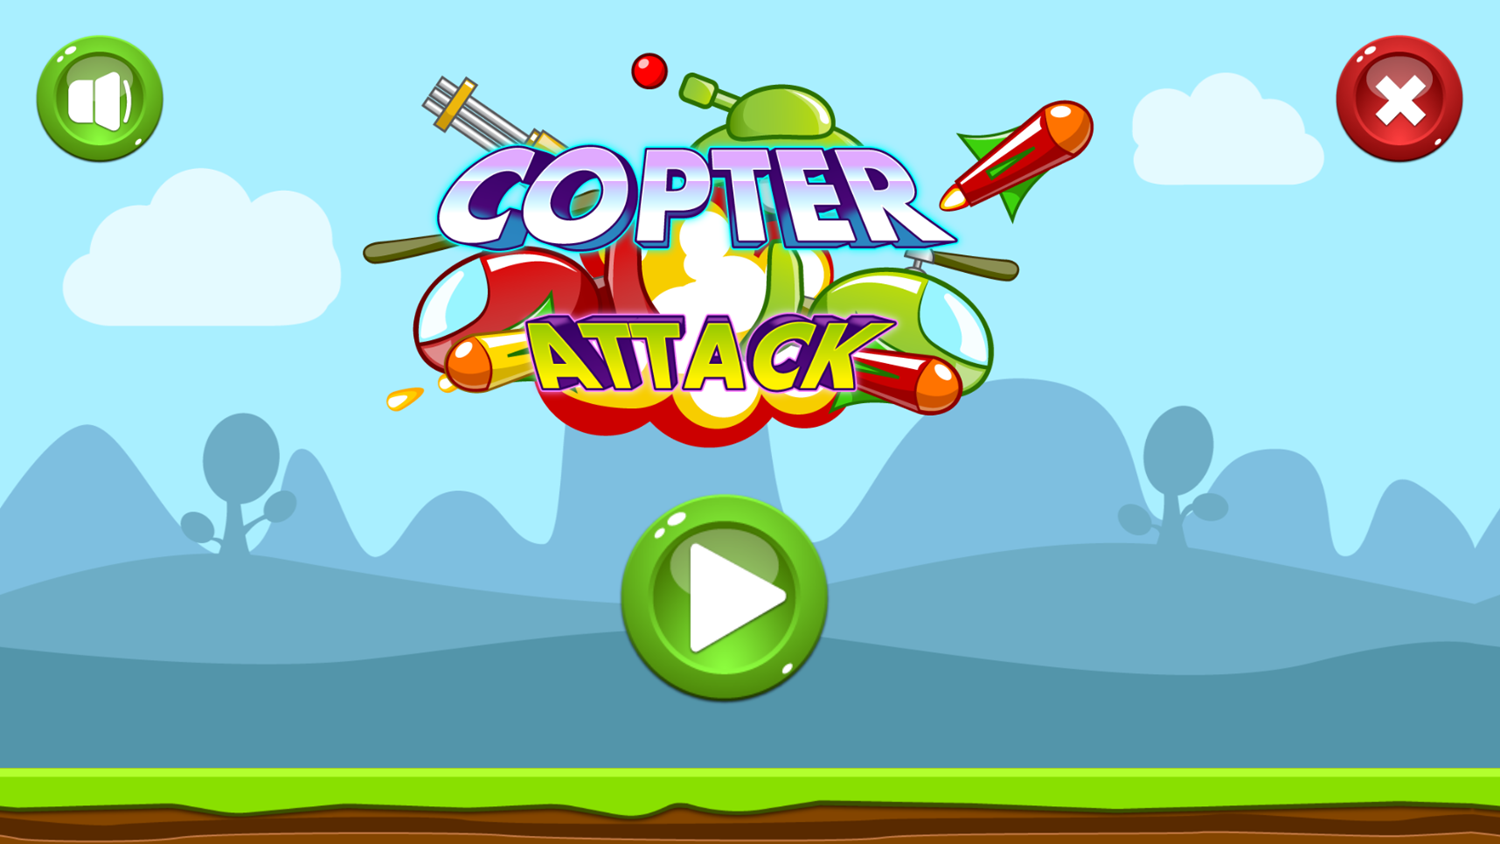 Copter Attack Game Welcome Screen Screenshot.